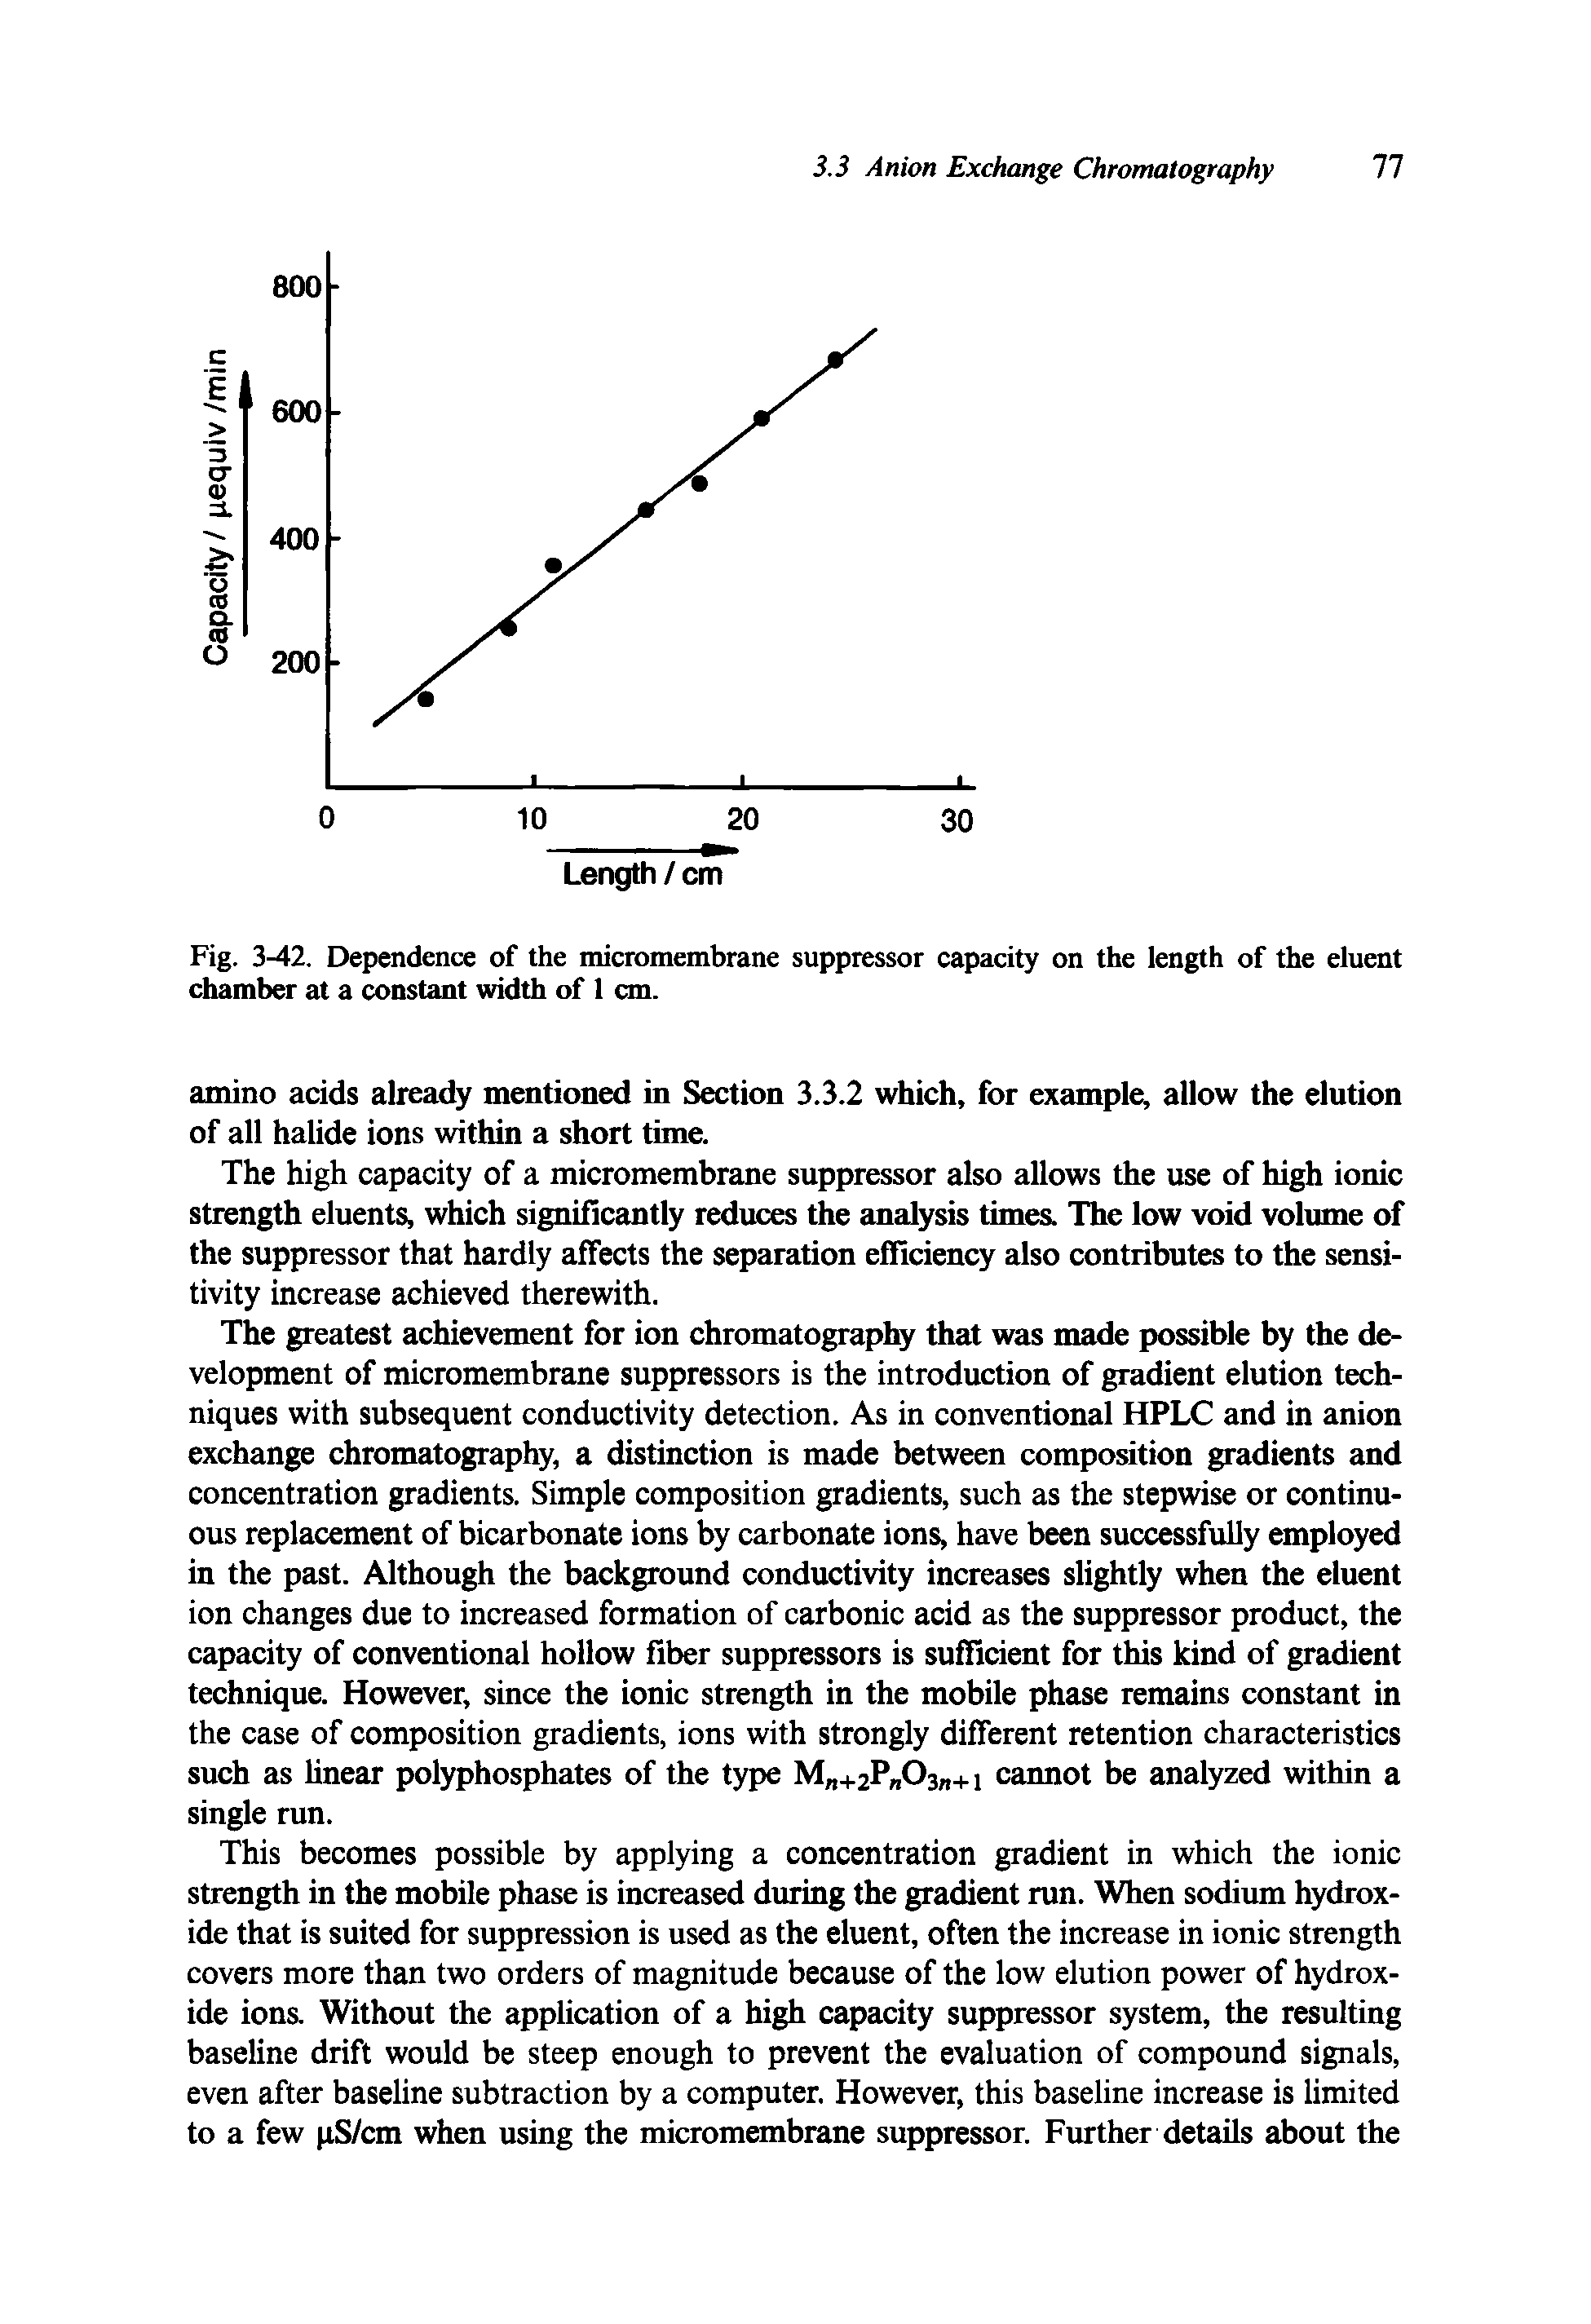 Fig. 3-42. Dependence of the micromembrane suppressor capacity on the length of the eluent chamber at a constant width of 1 cm.